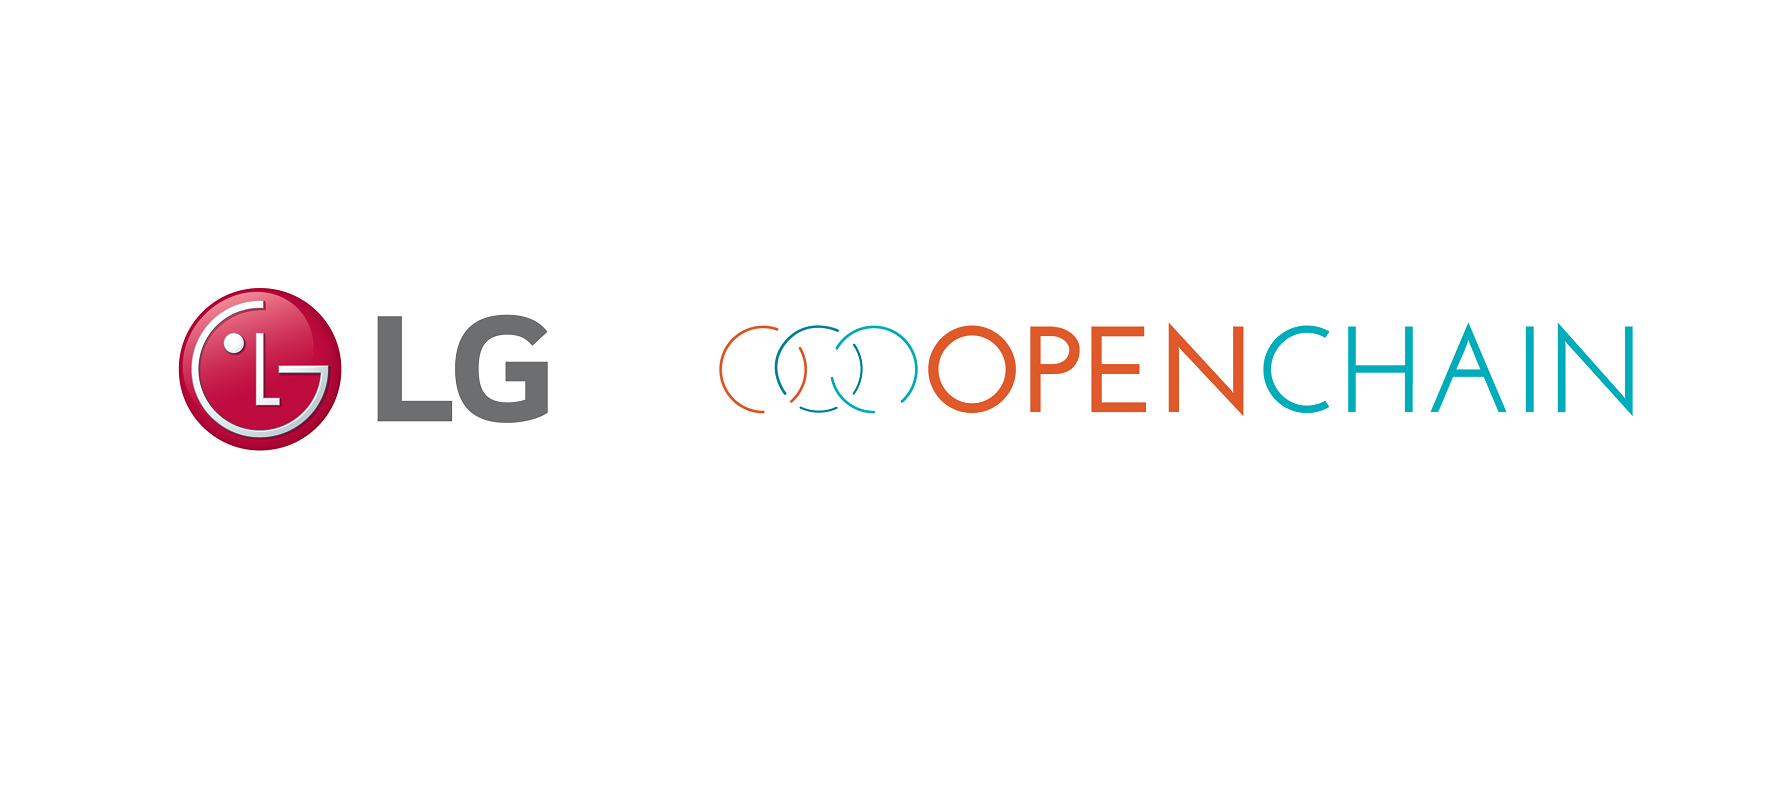 Logos of LG and the Linux Foundation’s OpenChain Project placed side-by-side